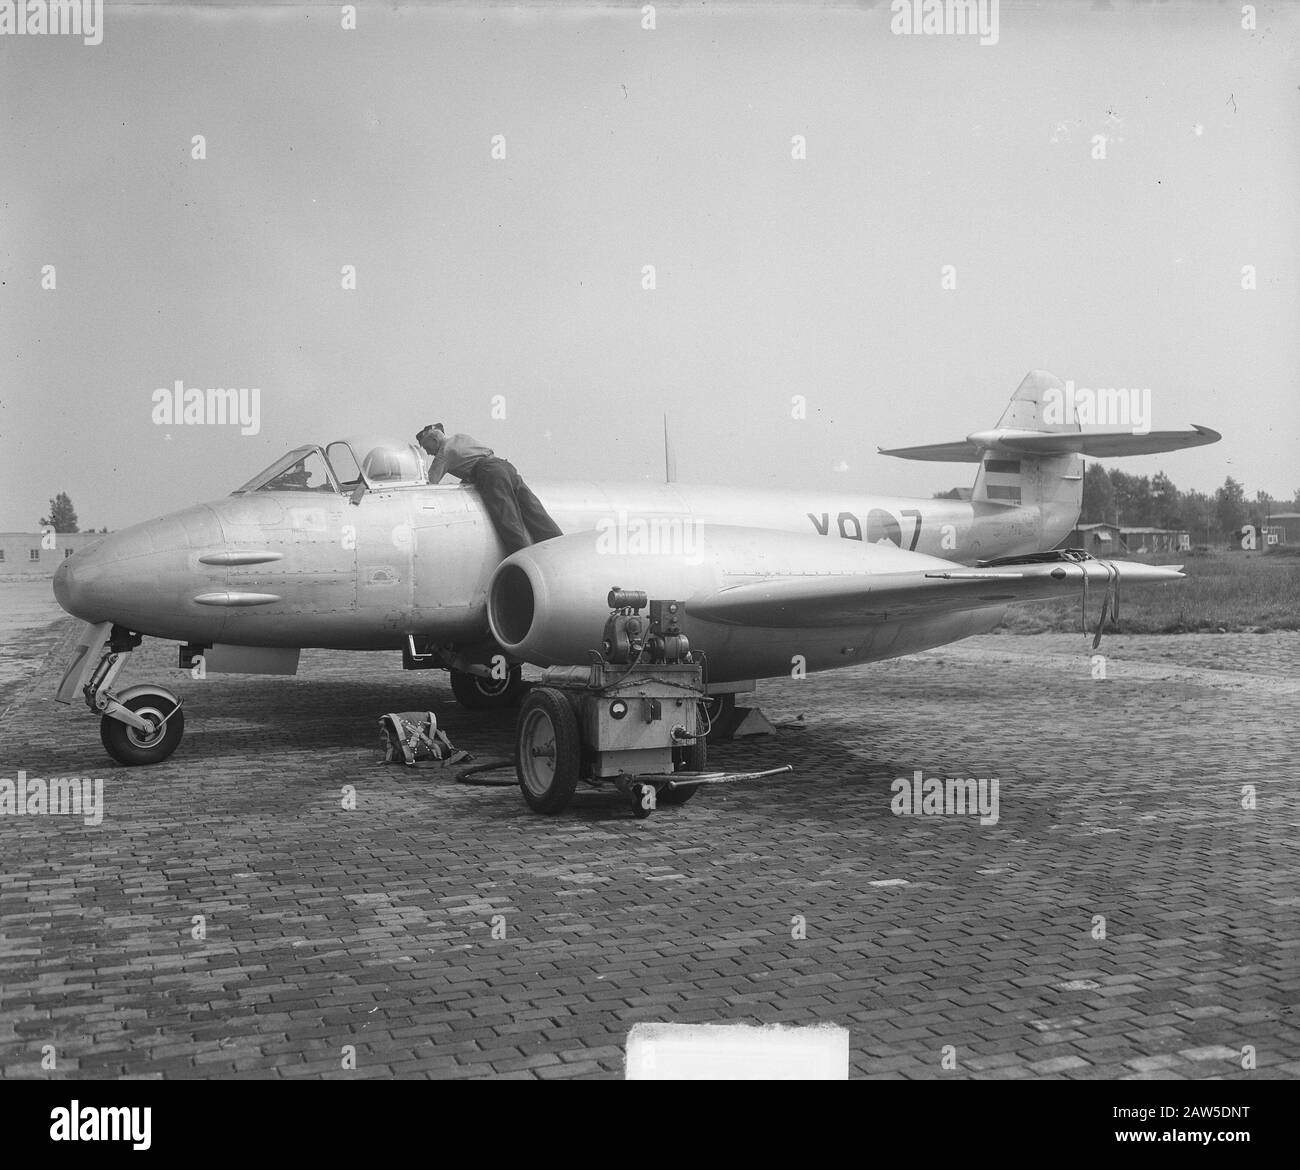 Record Flight Gloster Meteor over Ameland Annotation: The jet at Leeuwarden Air Base Date: August 28, 1949 Location: Leeuwarden Air Base Keywords: aviation, military aircraft, records Stock Photo